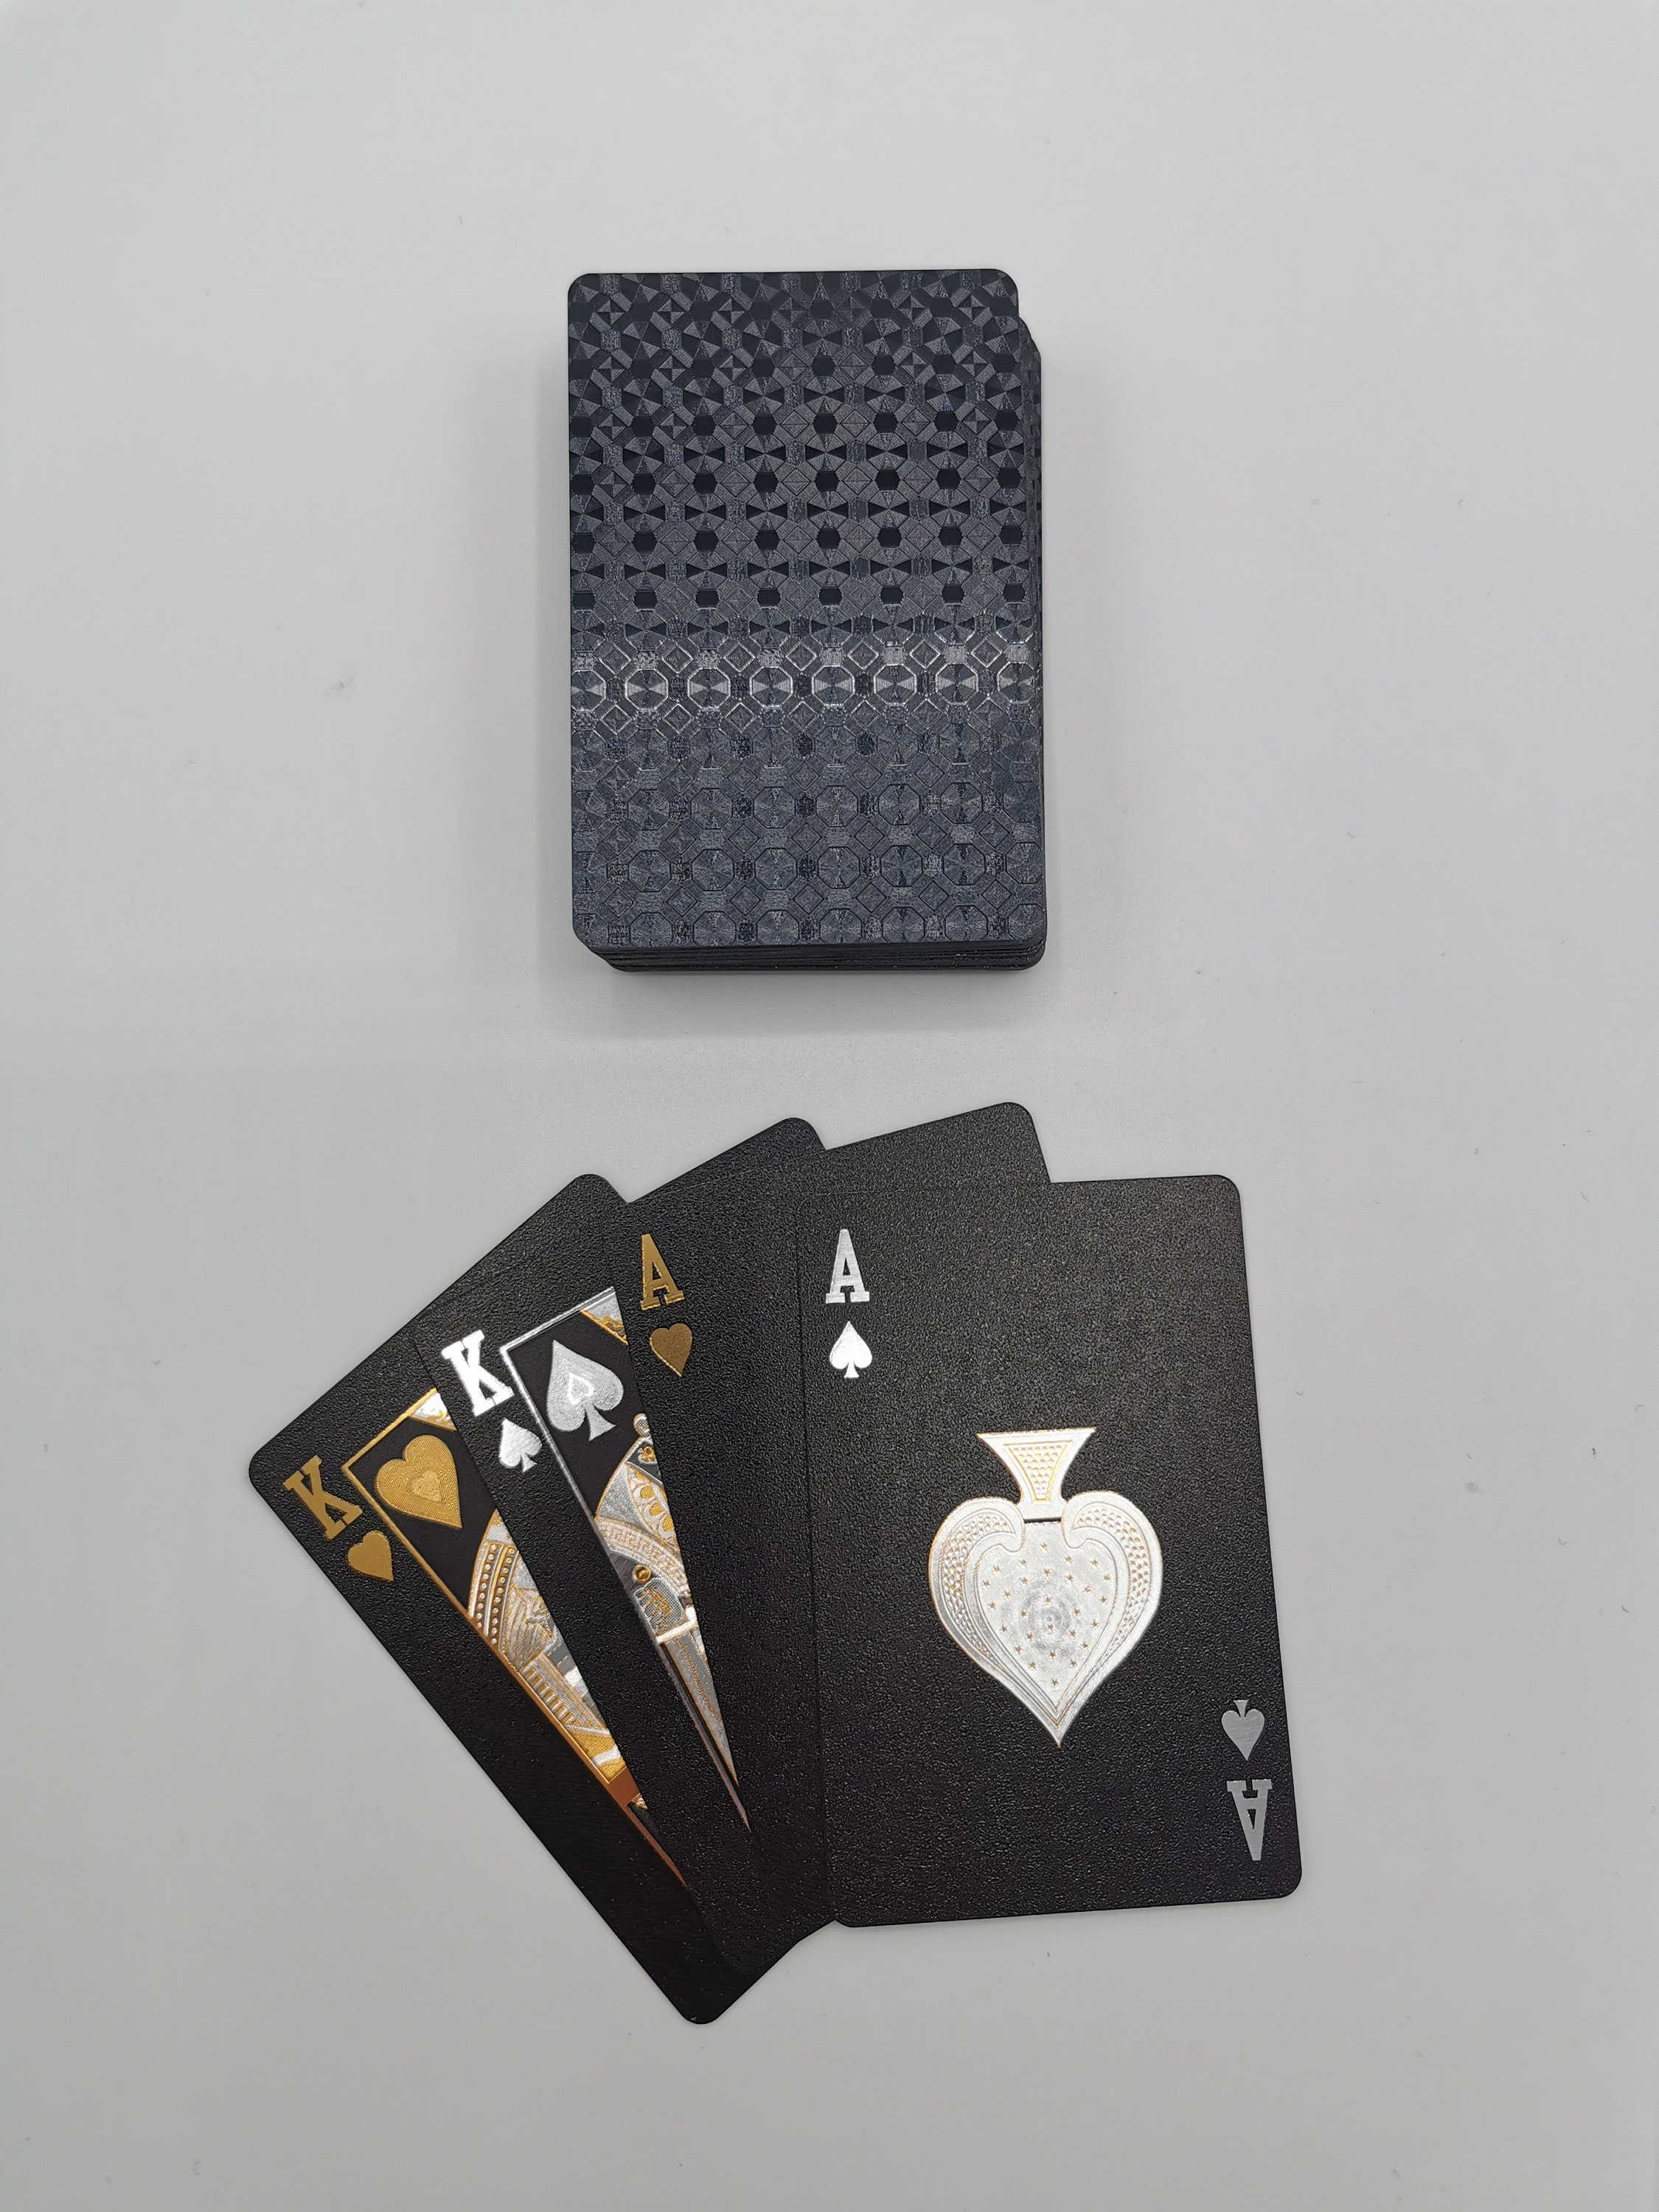 Full Poker Deck Gold Silver Black Foil Dollar Plaid Style Plastic Playing Cards 